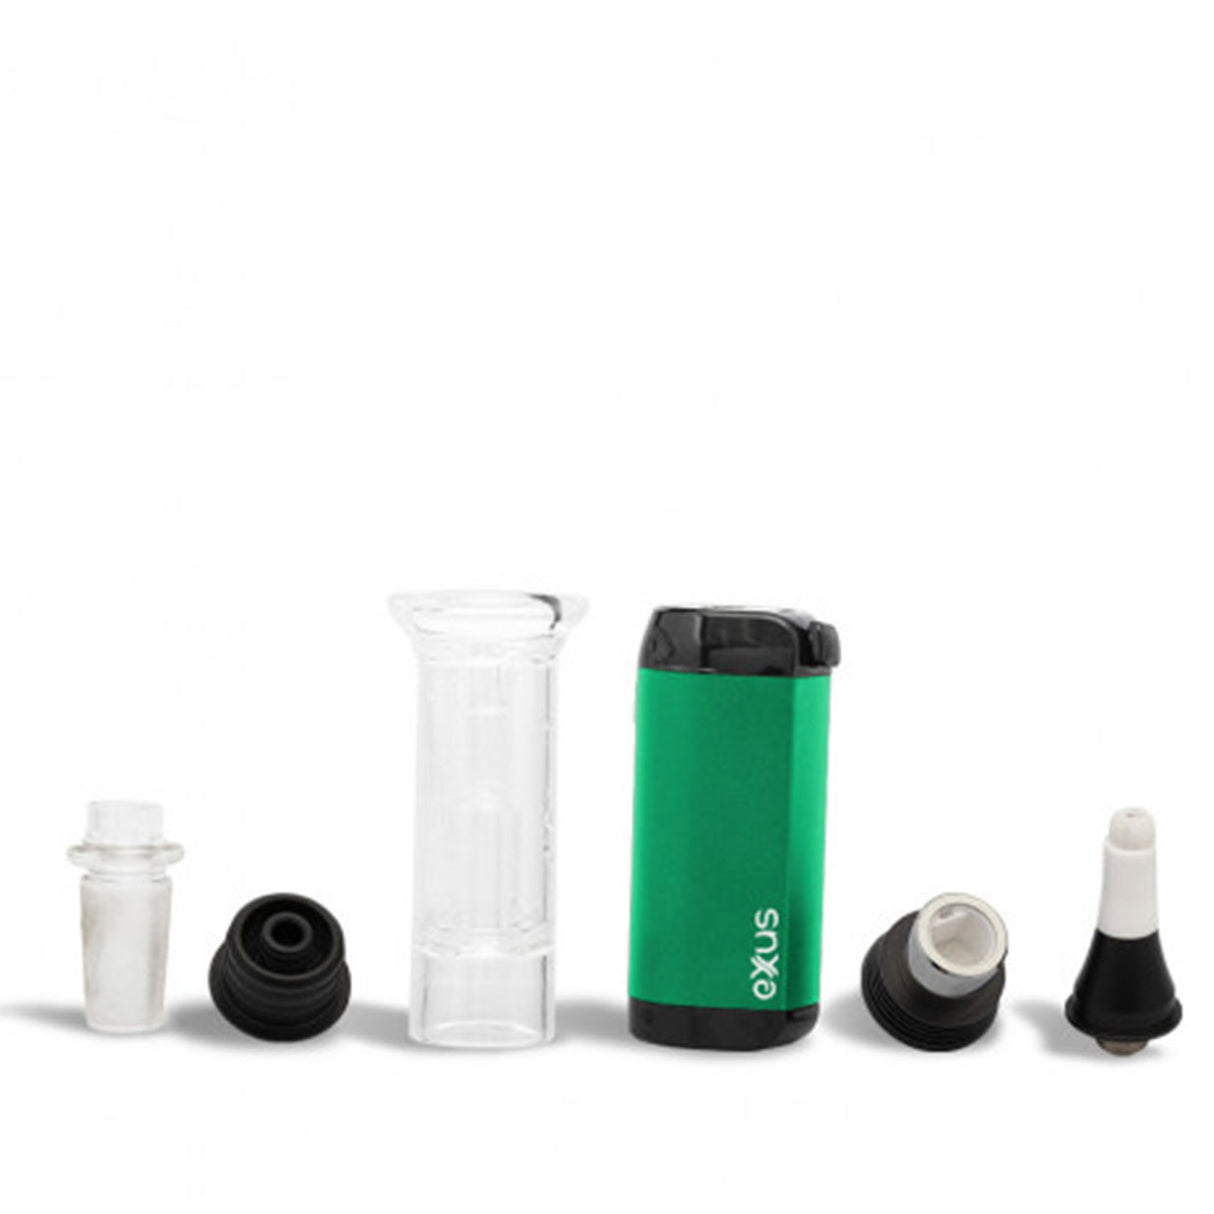 Green Exxus VRS Vaporizer Kit with Nectar Collector Mode, Dab Rig Mode, Cartridge Mode Comes with carrying pouch 9